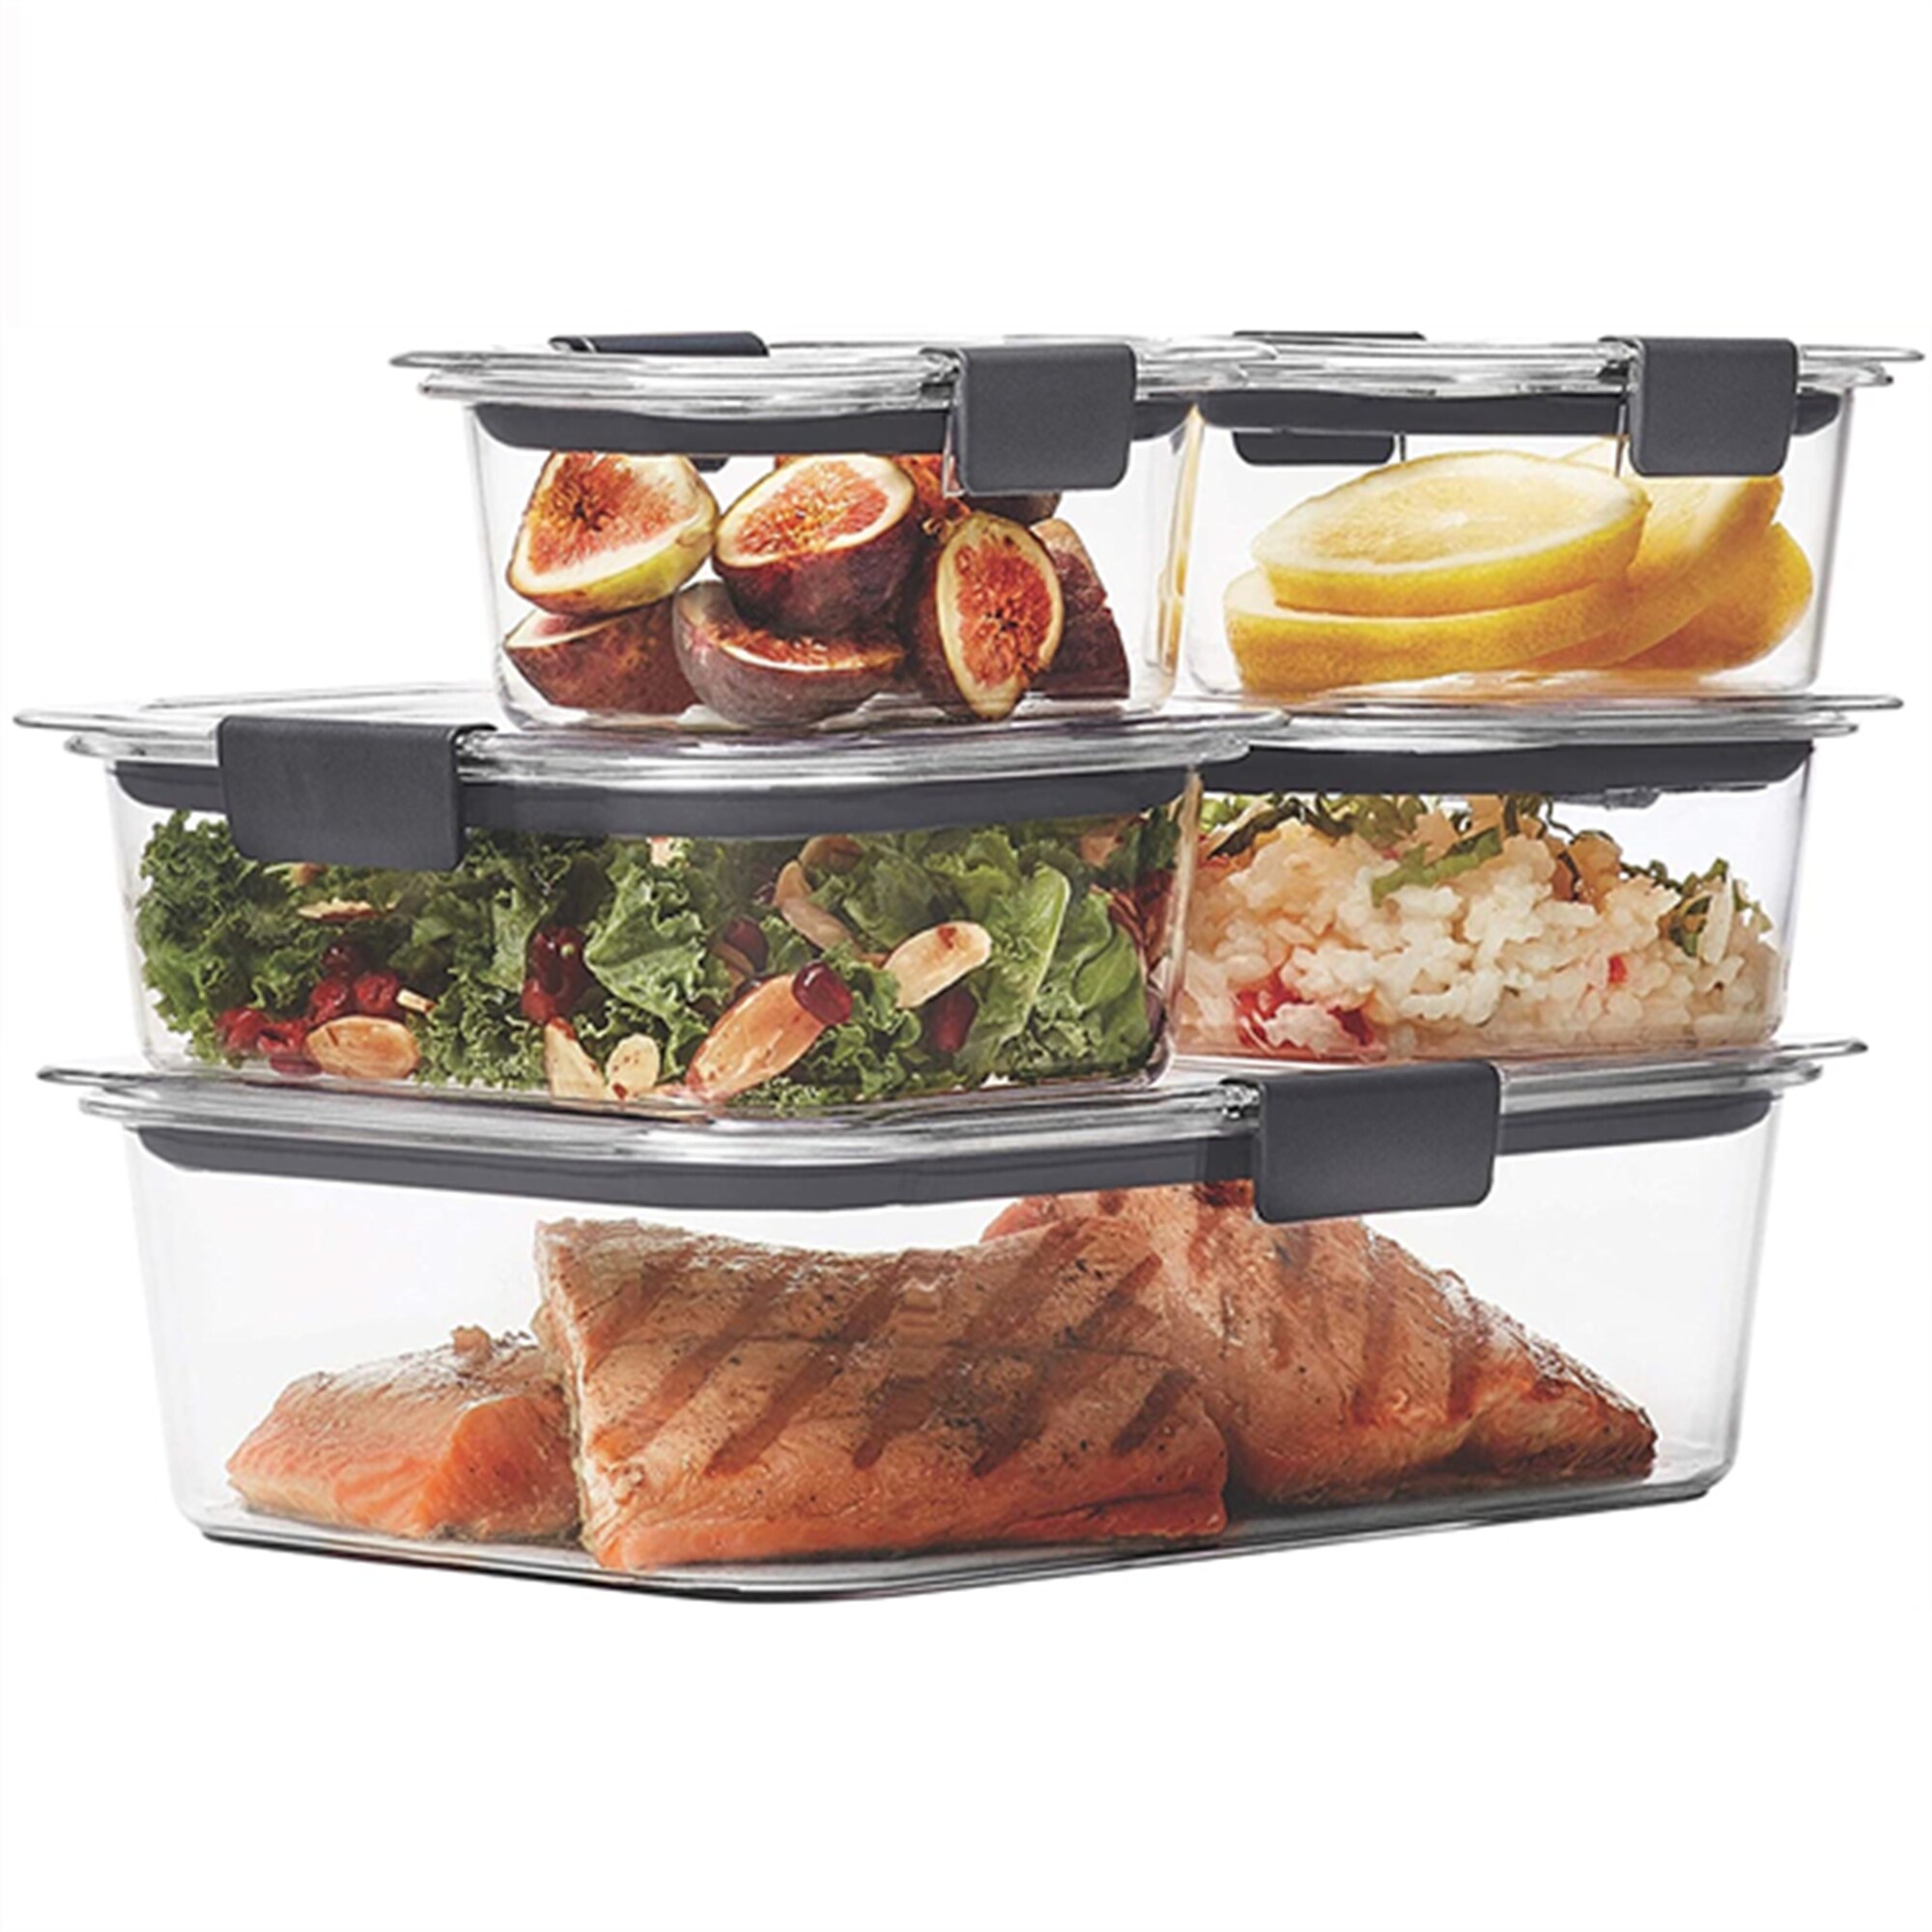 Basics Tritan Locking Food Storage Container, 10 Pieces, 5 Count (5  Containers With 5 Lids), Clear